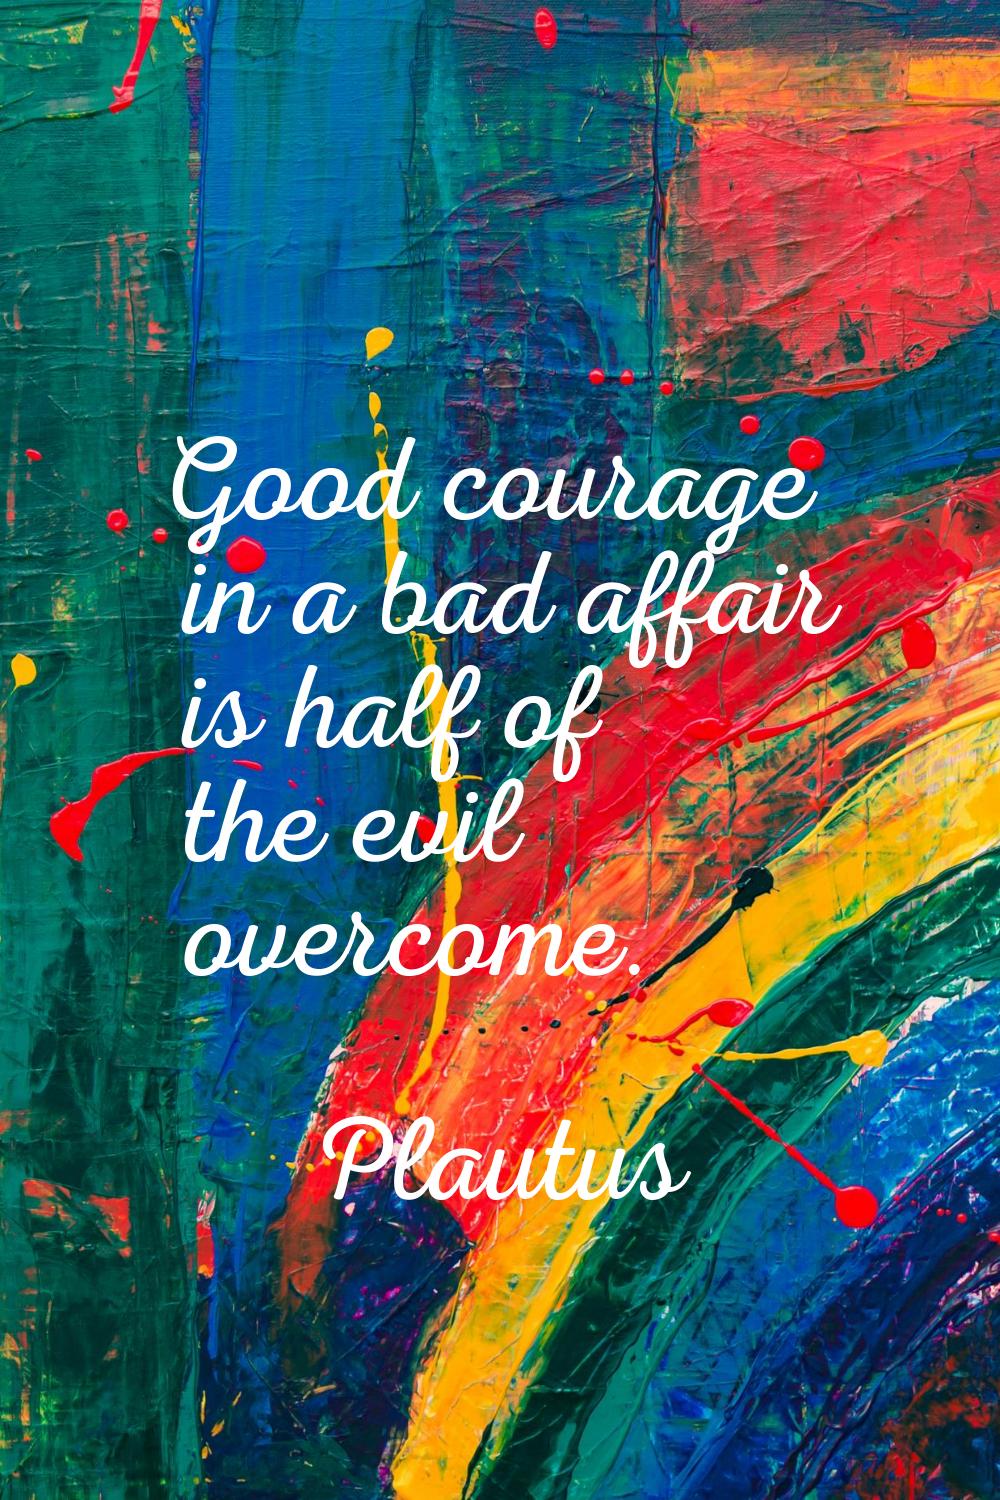 Good courage in a bad affair is half of the evil overcome.